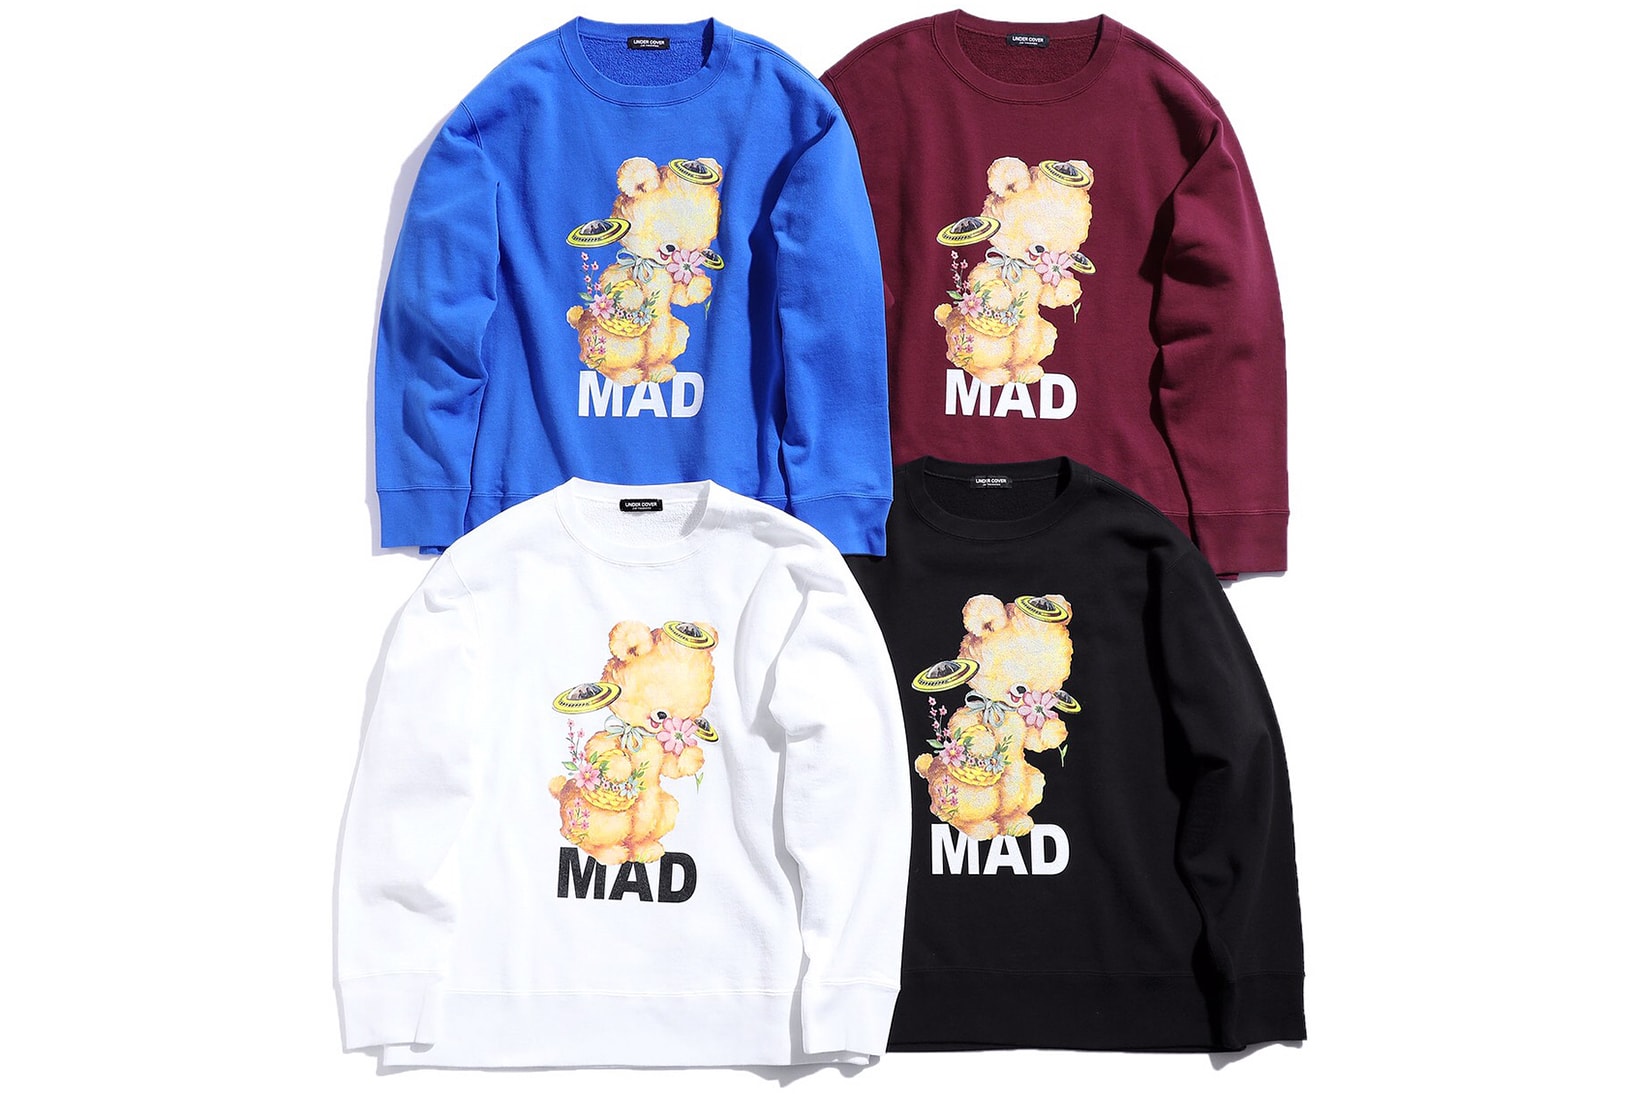 UNDERCOVER Spring/Summer 2018 MADSTORE Exclusives drop coaches jacket tee shirt collection long sleeve graphic UC japan exclusive sweater april 21